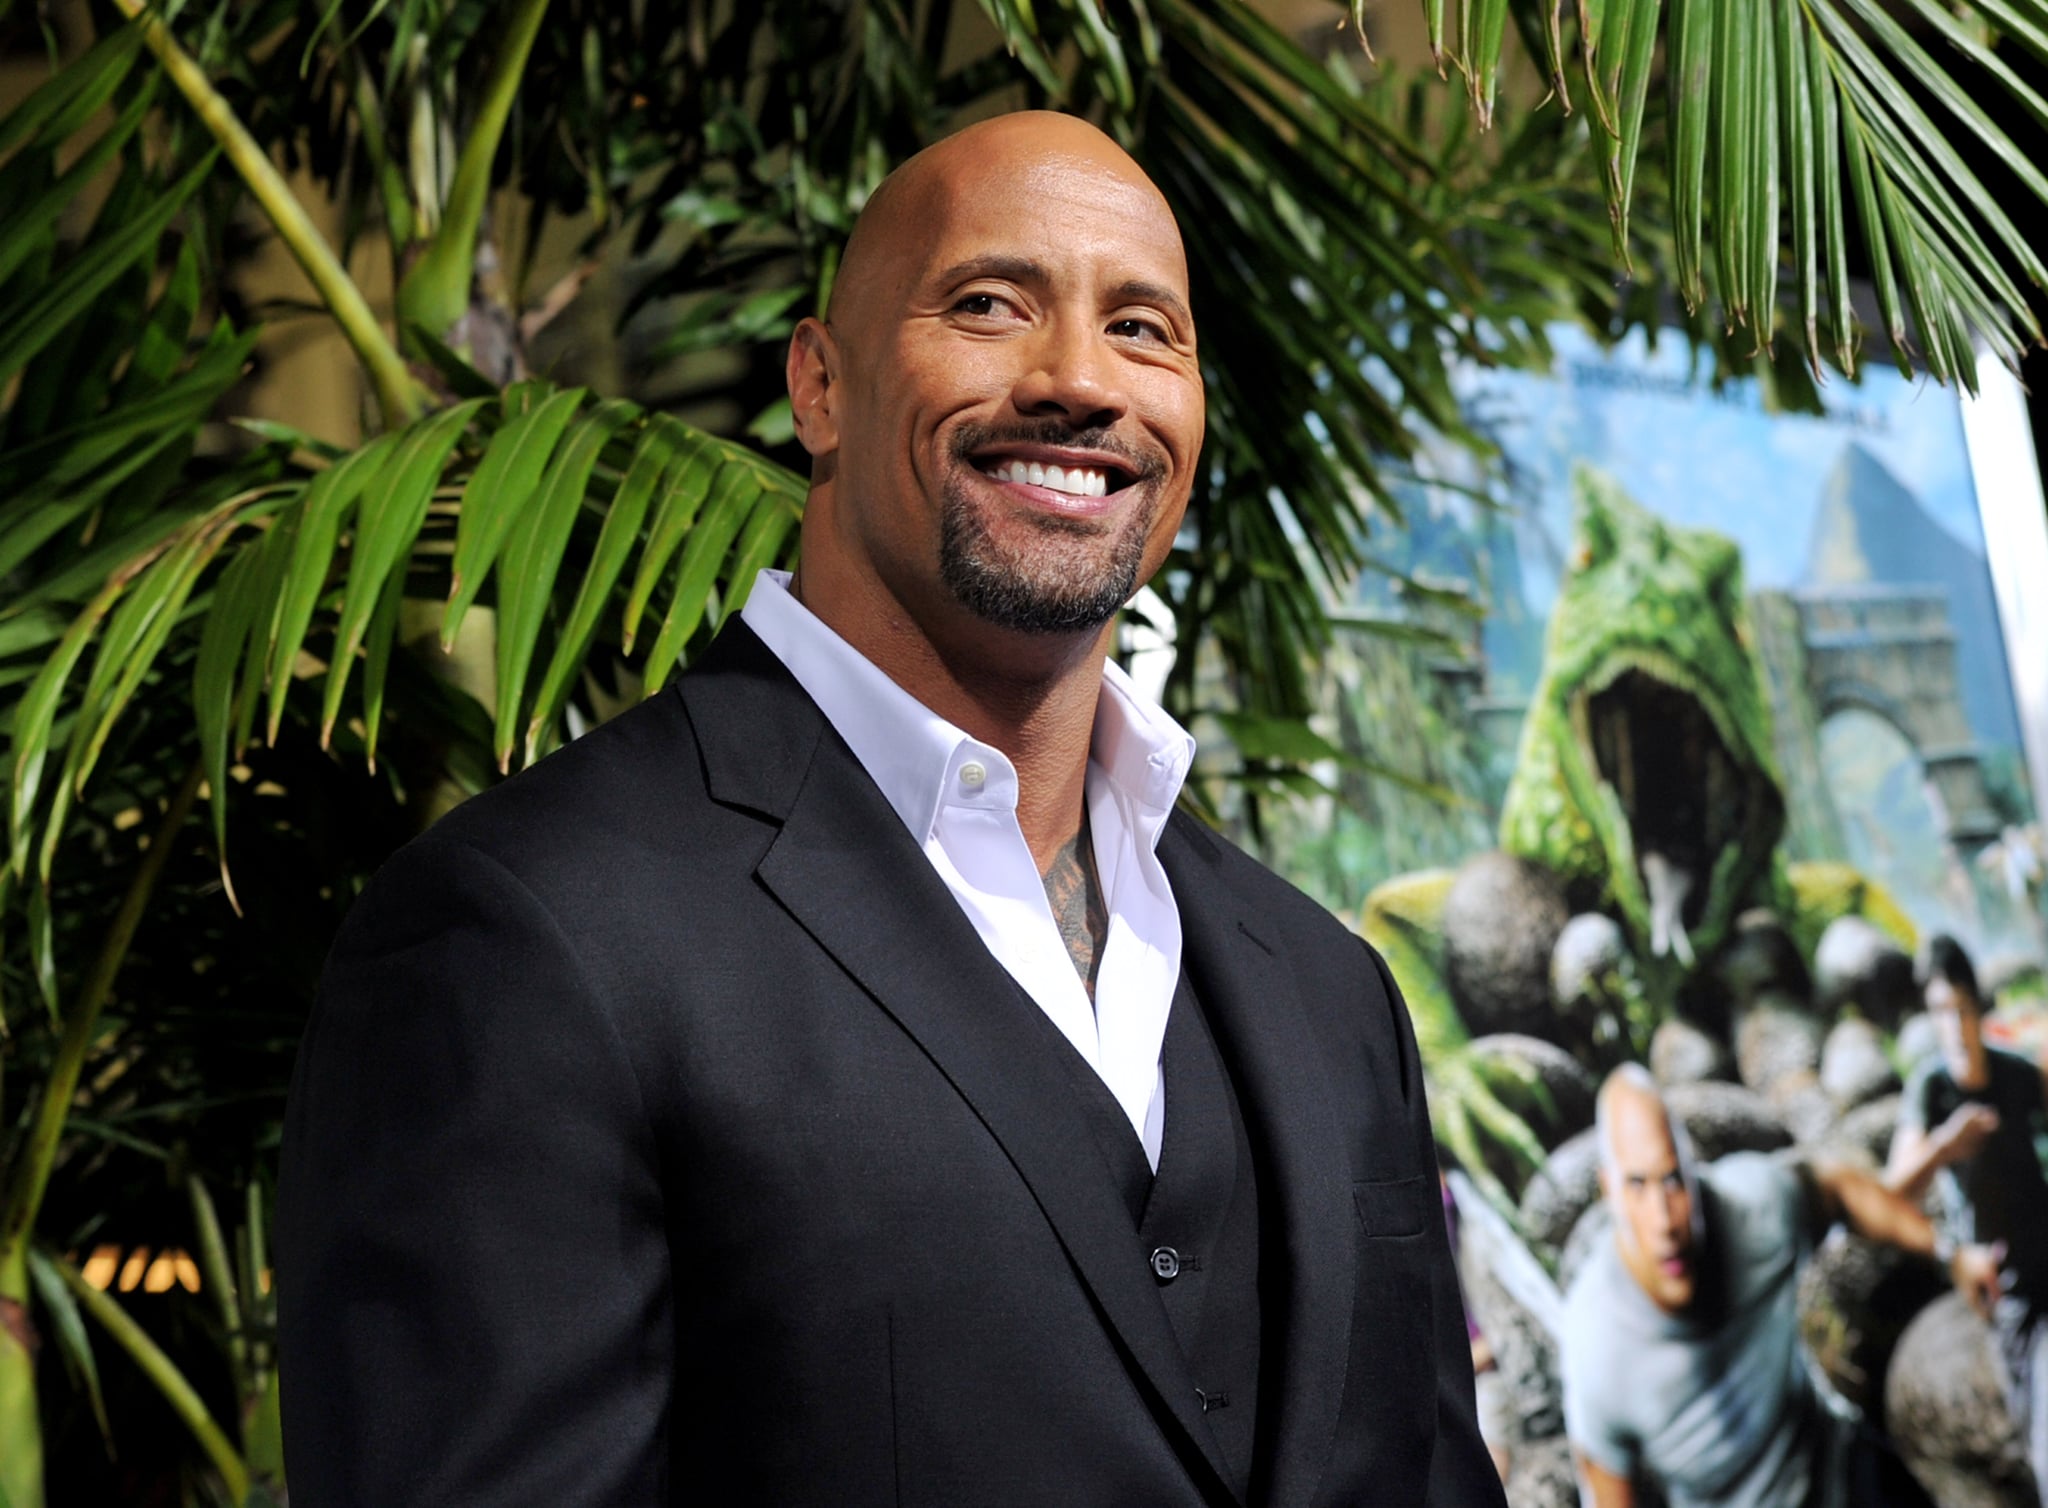 LOS ANGELES, CA - FEBRUARY 02:  Actor Dwayne Johnson arrives at the premiere of Warner Bros. Pictures